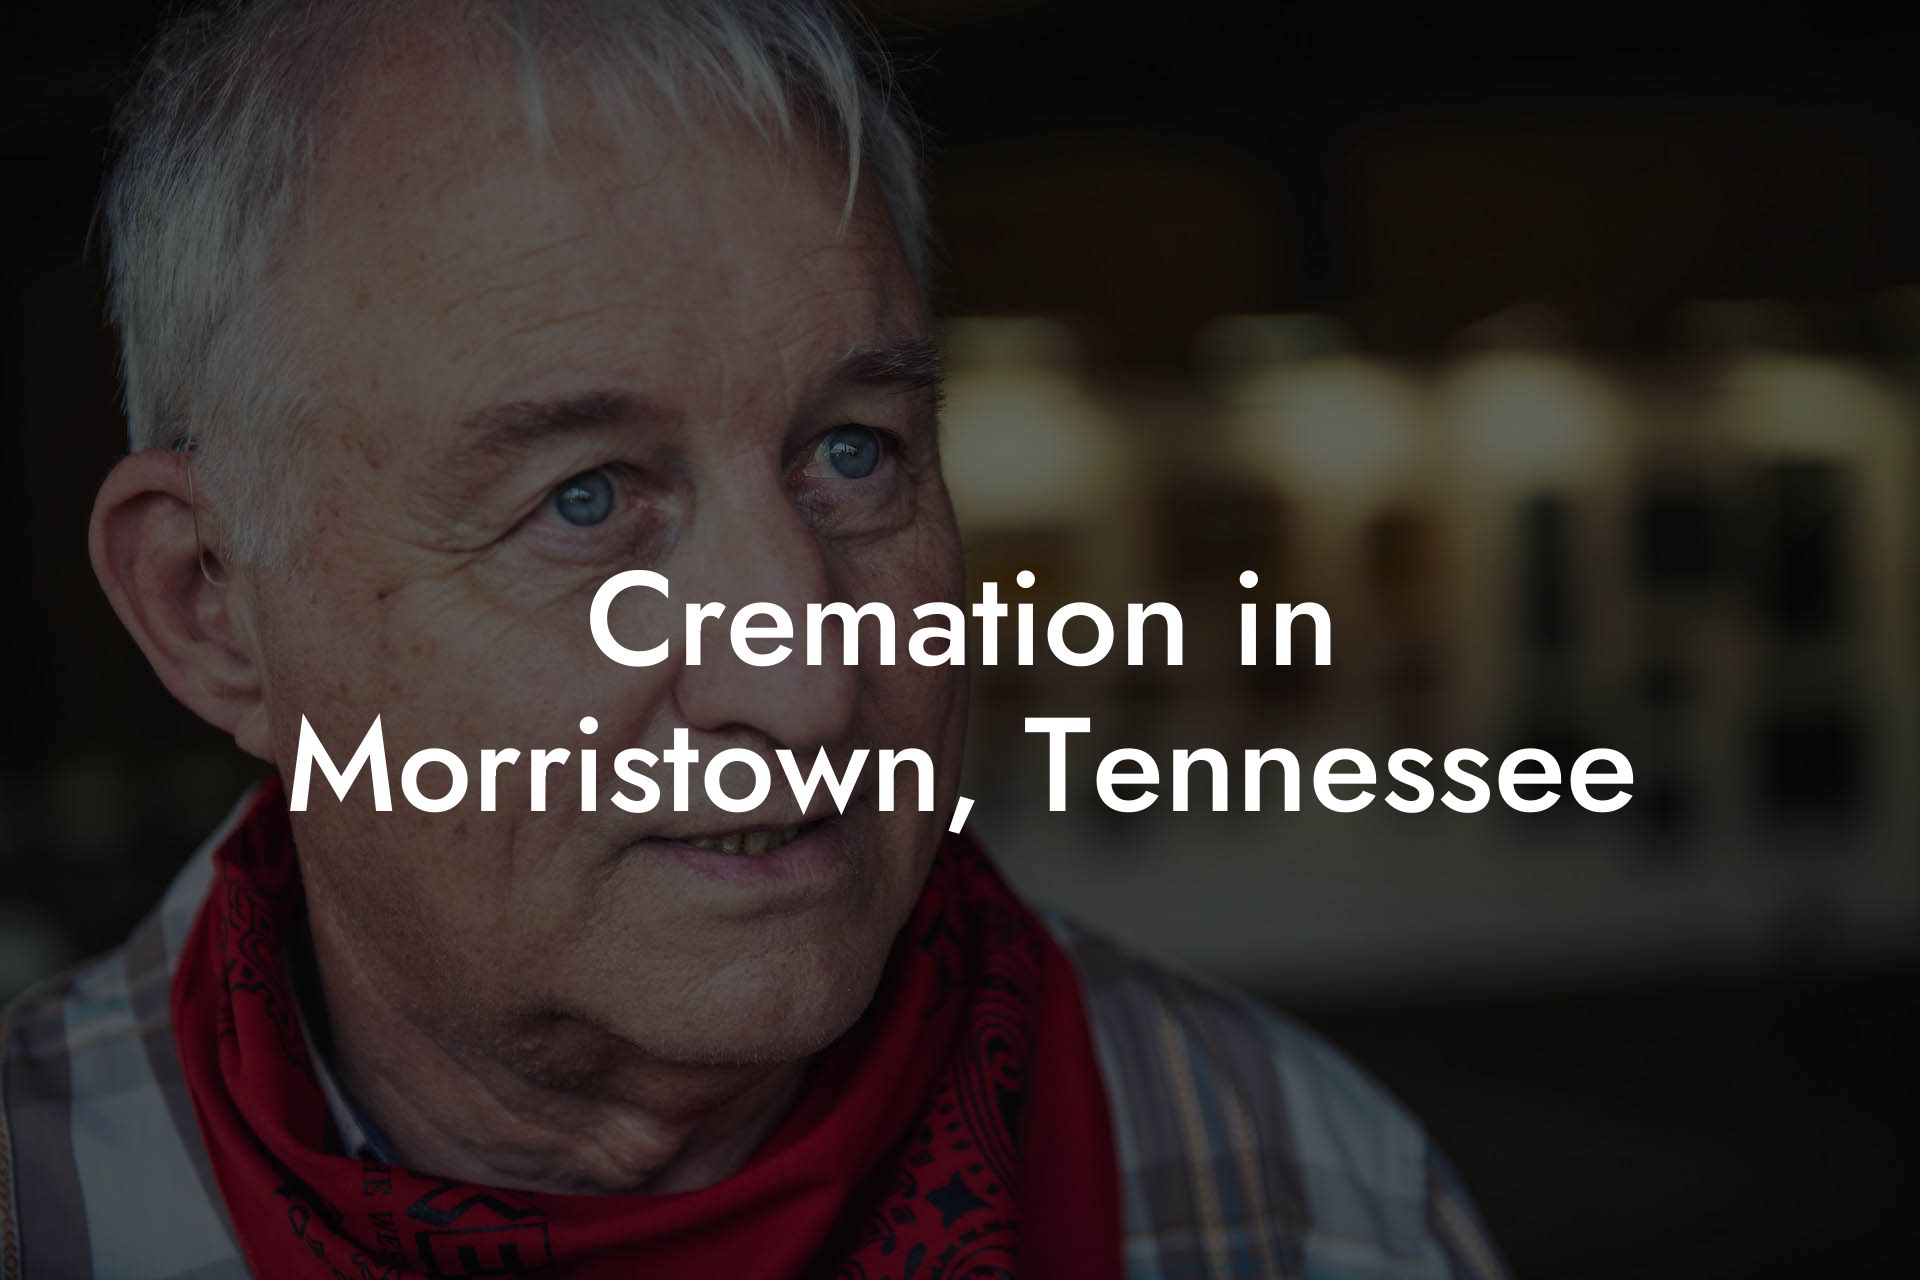 Cremation in Morristown, Tennessee